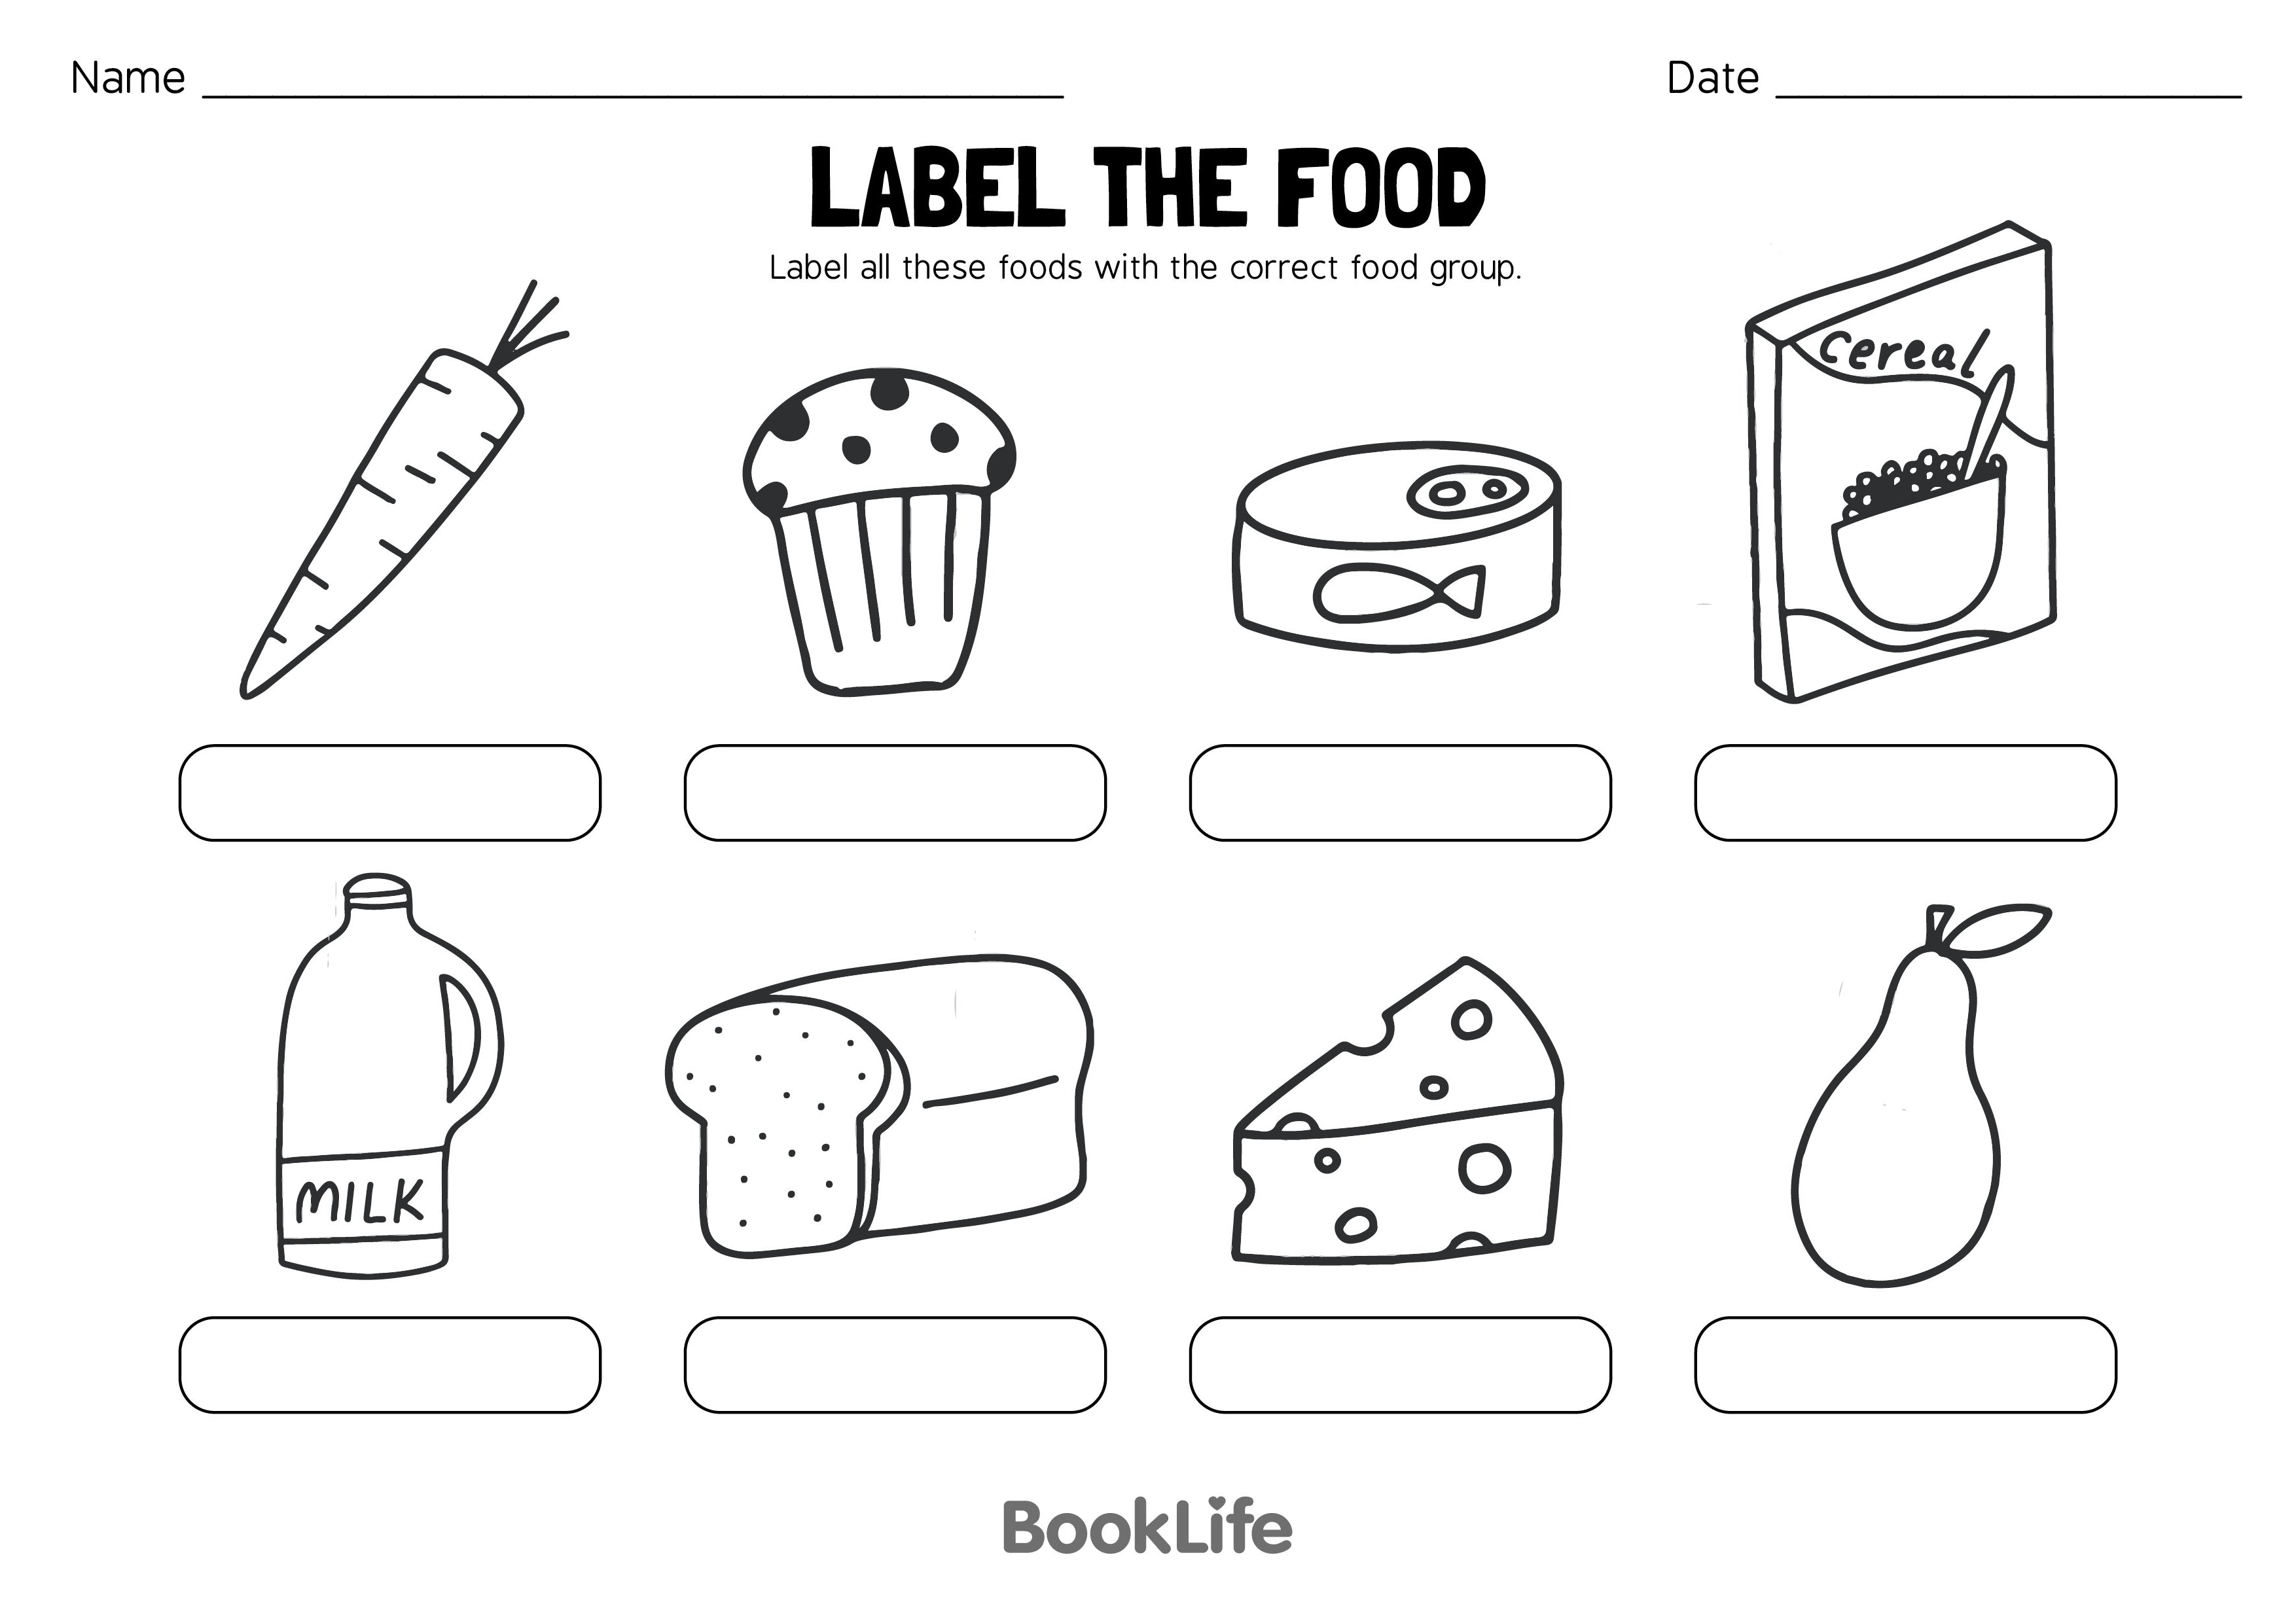 Healthy Eating - Label The Food